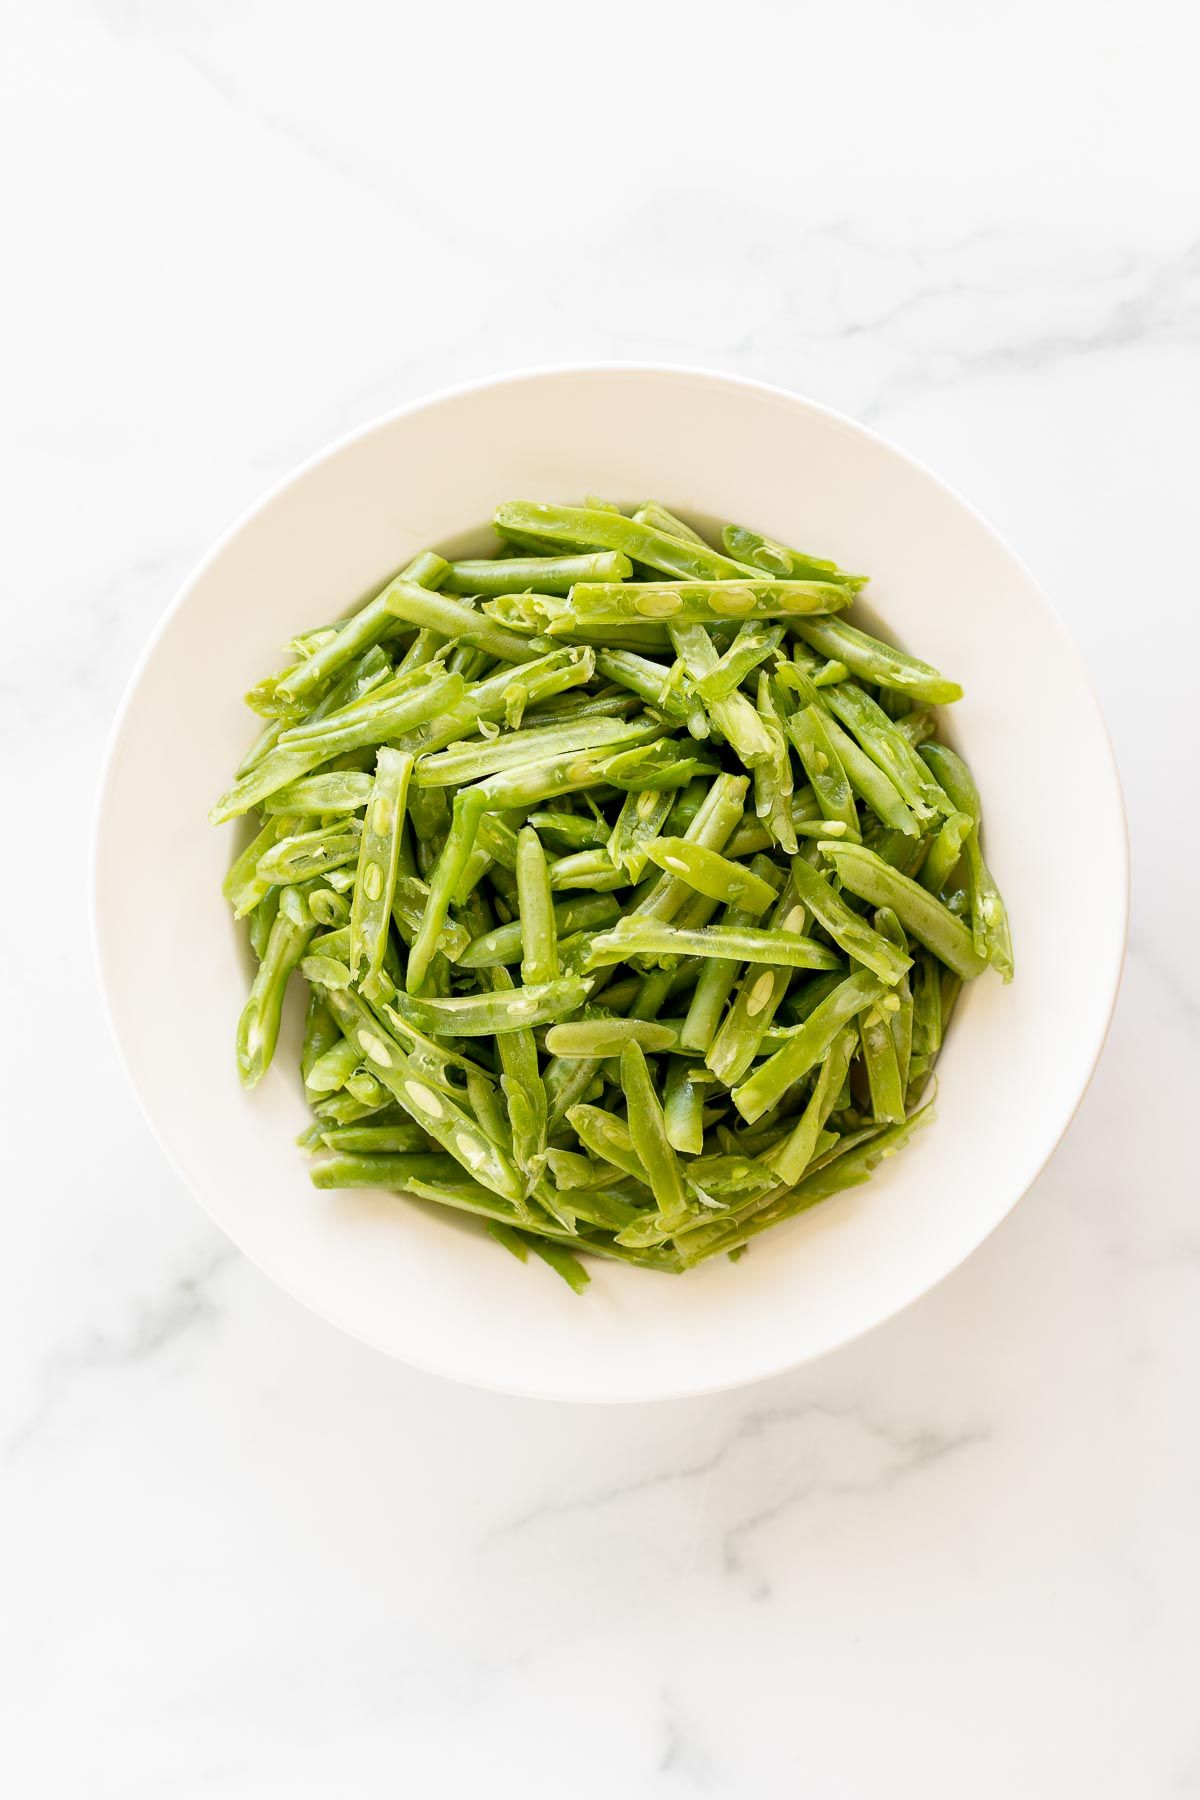 A white bowl on a marble surface, filled with French green beans.